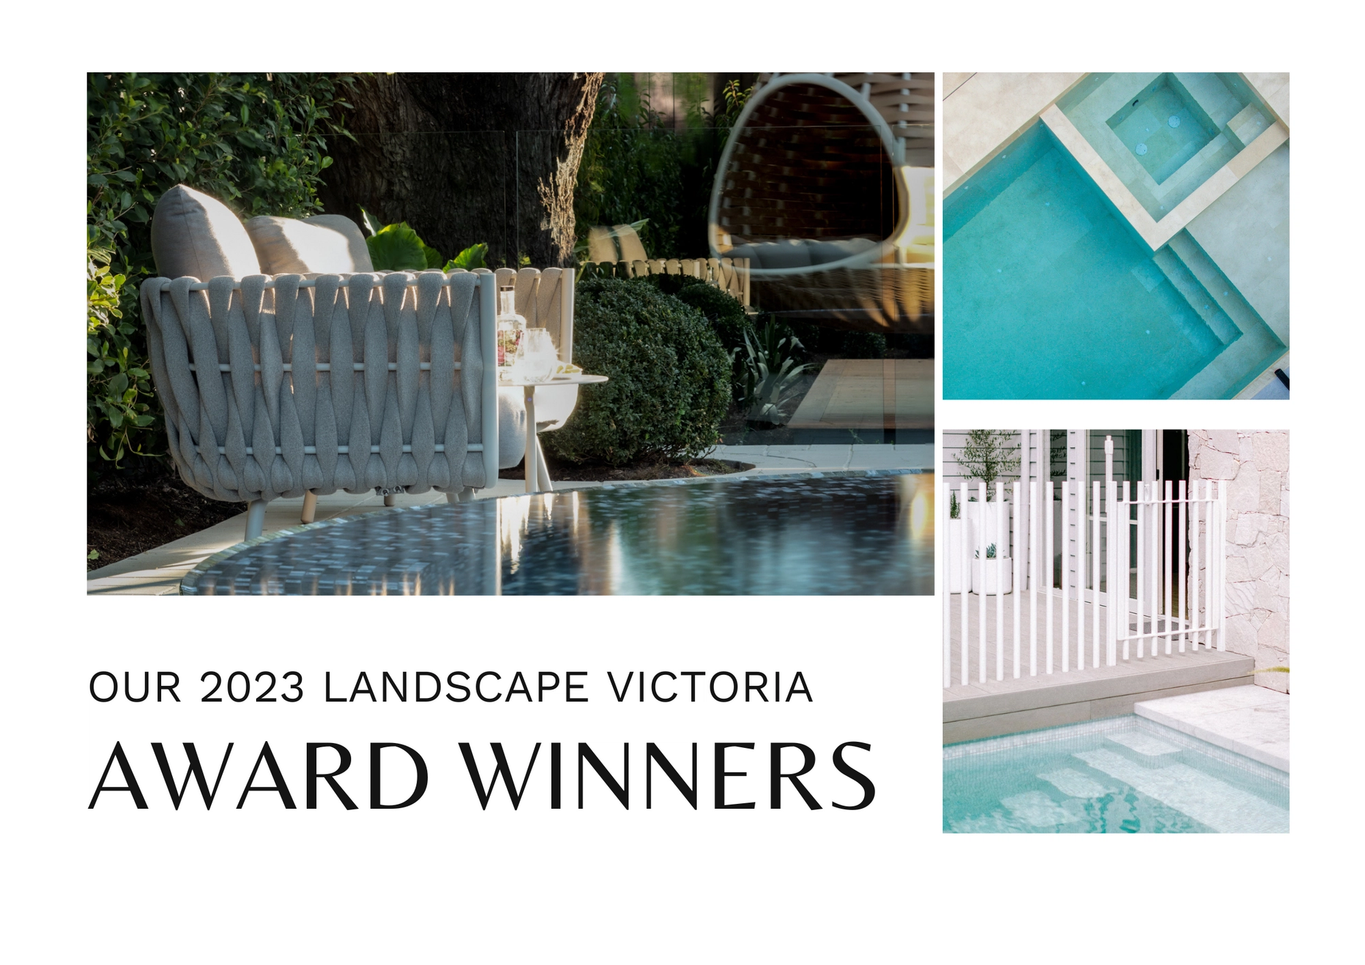 Summary of our 2023 Landscape Victoria award winning projects